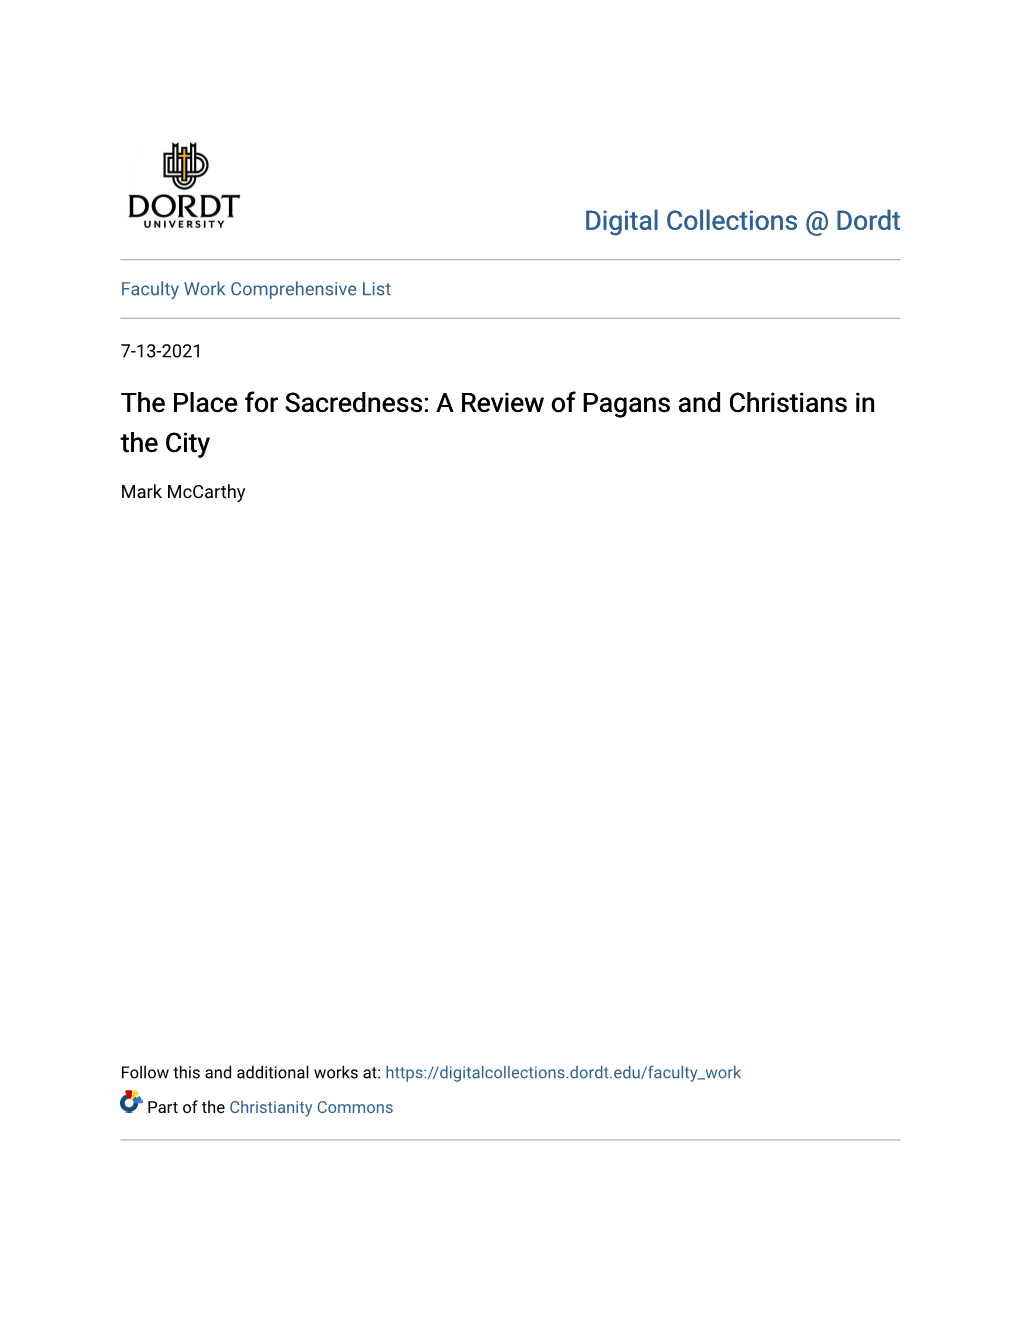 The Place for Sacredness: a Review of Pagans and Christians in the City